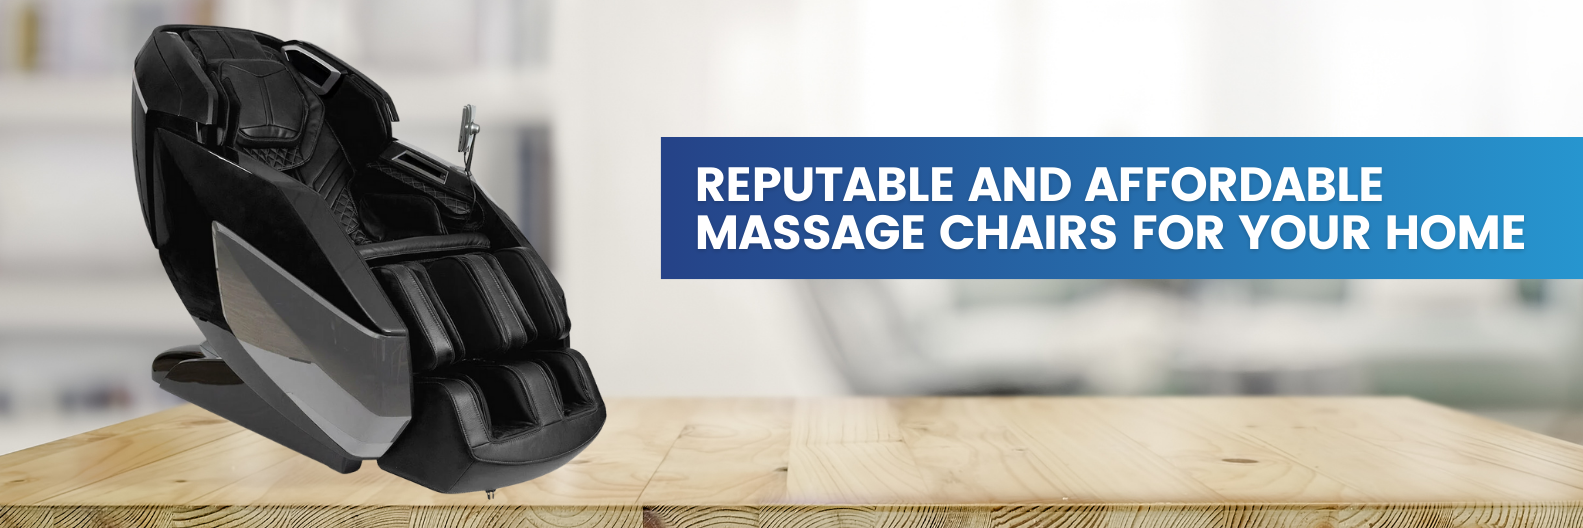 Find affordable massage chairs for home: Enjoy comfort and savings with top brands designed for everyday relaxation including Daiwa, Infinity, and Osaki massage chairs.